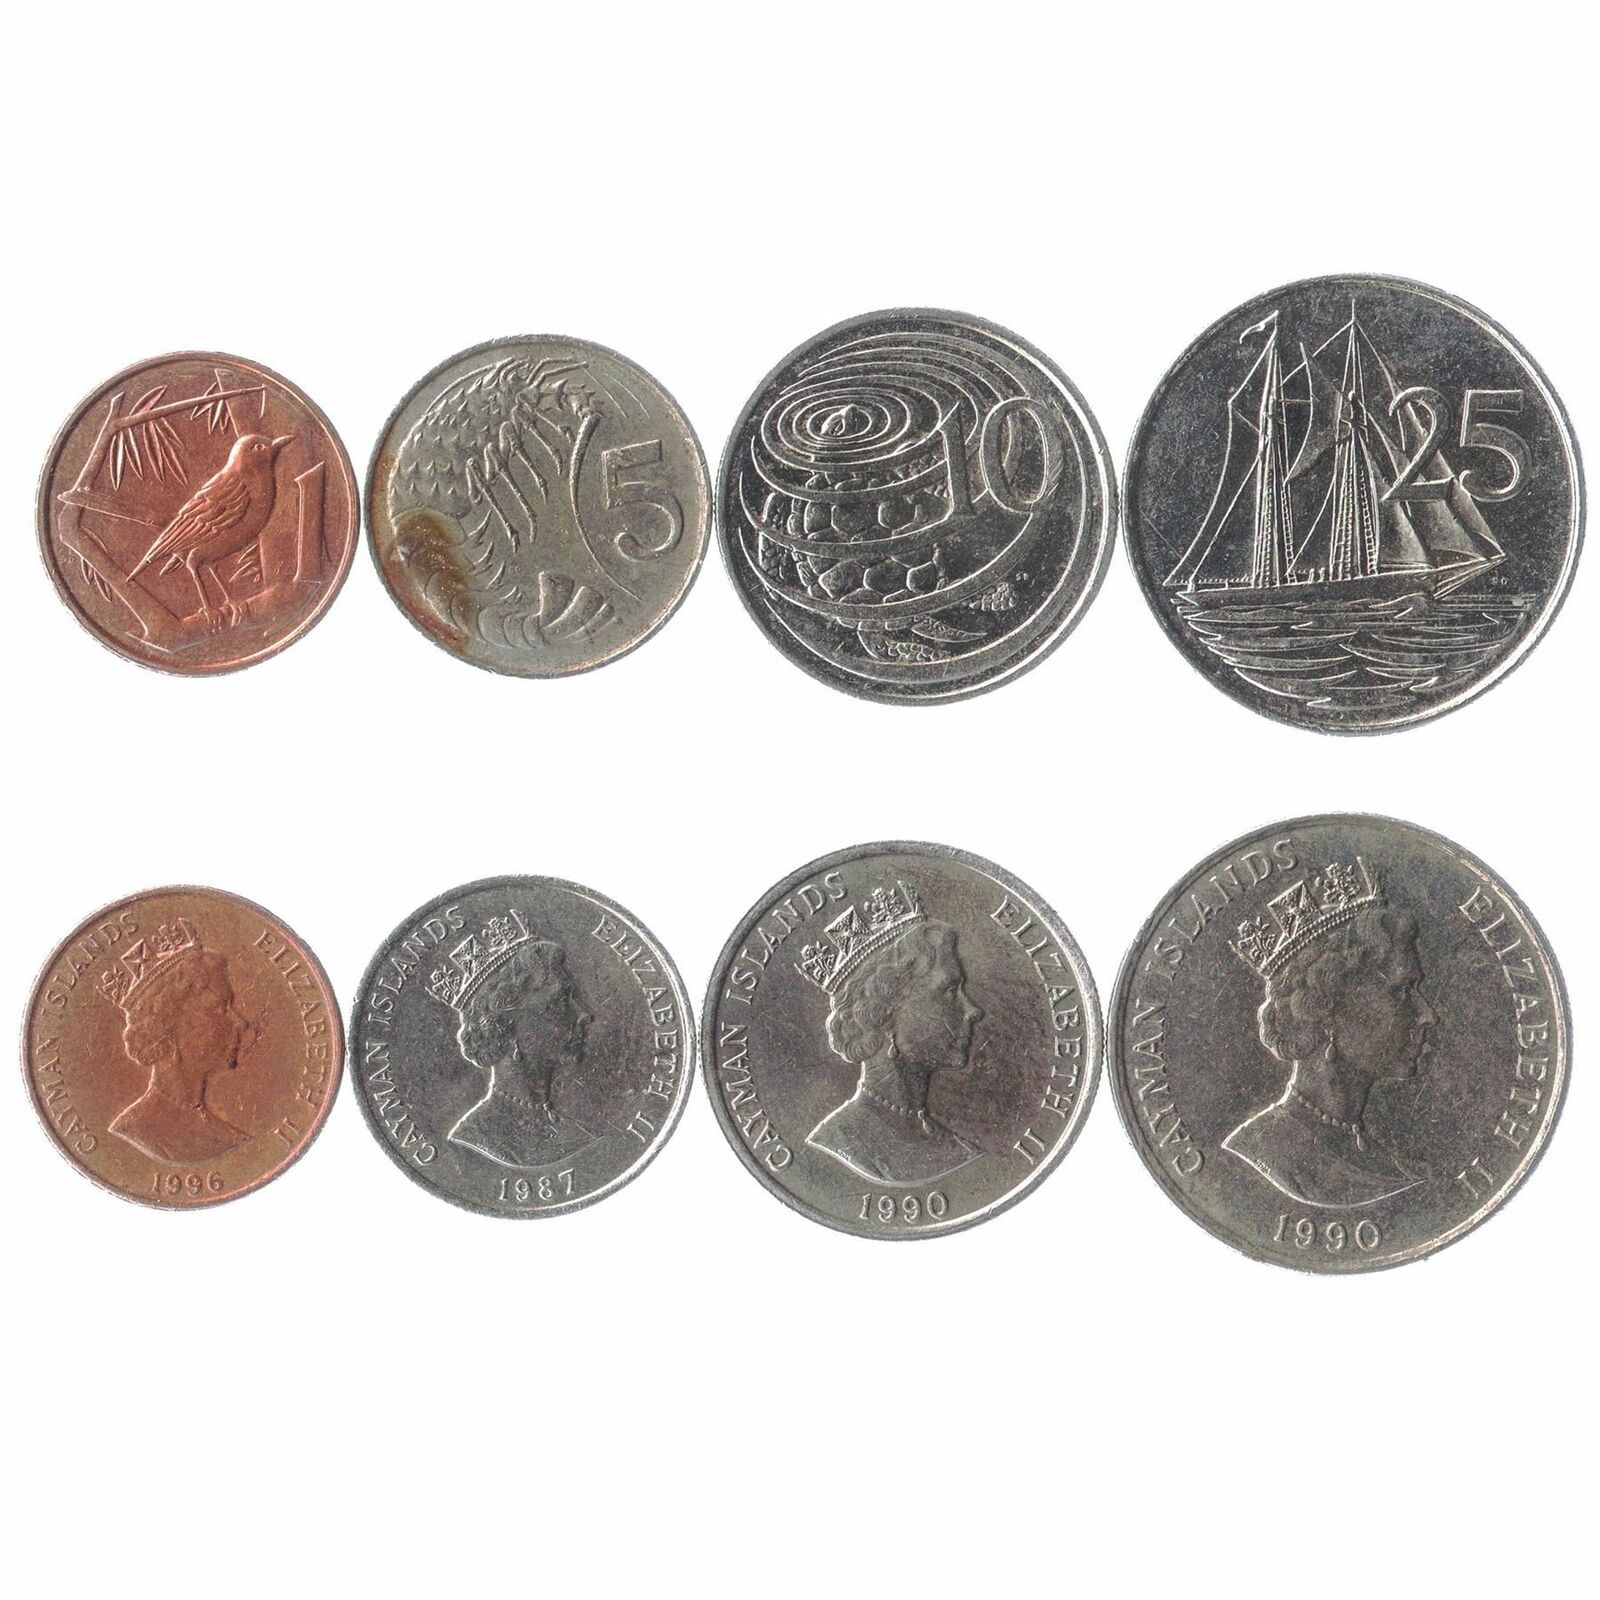 SET OF 4 COINS FROM CAYMAN ISLANDS. 1, 5, 10, 25 CENTS. 1987-1996